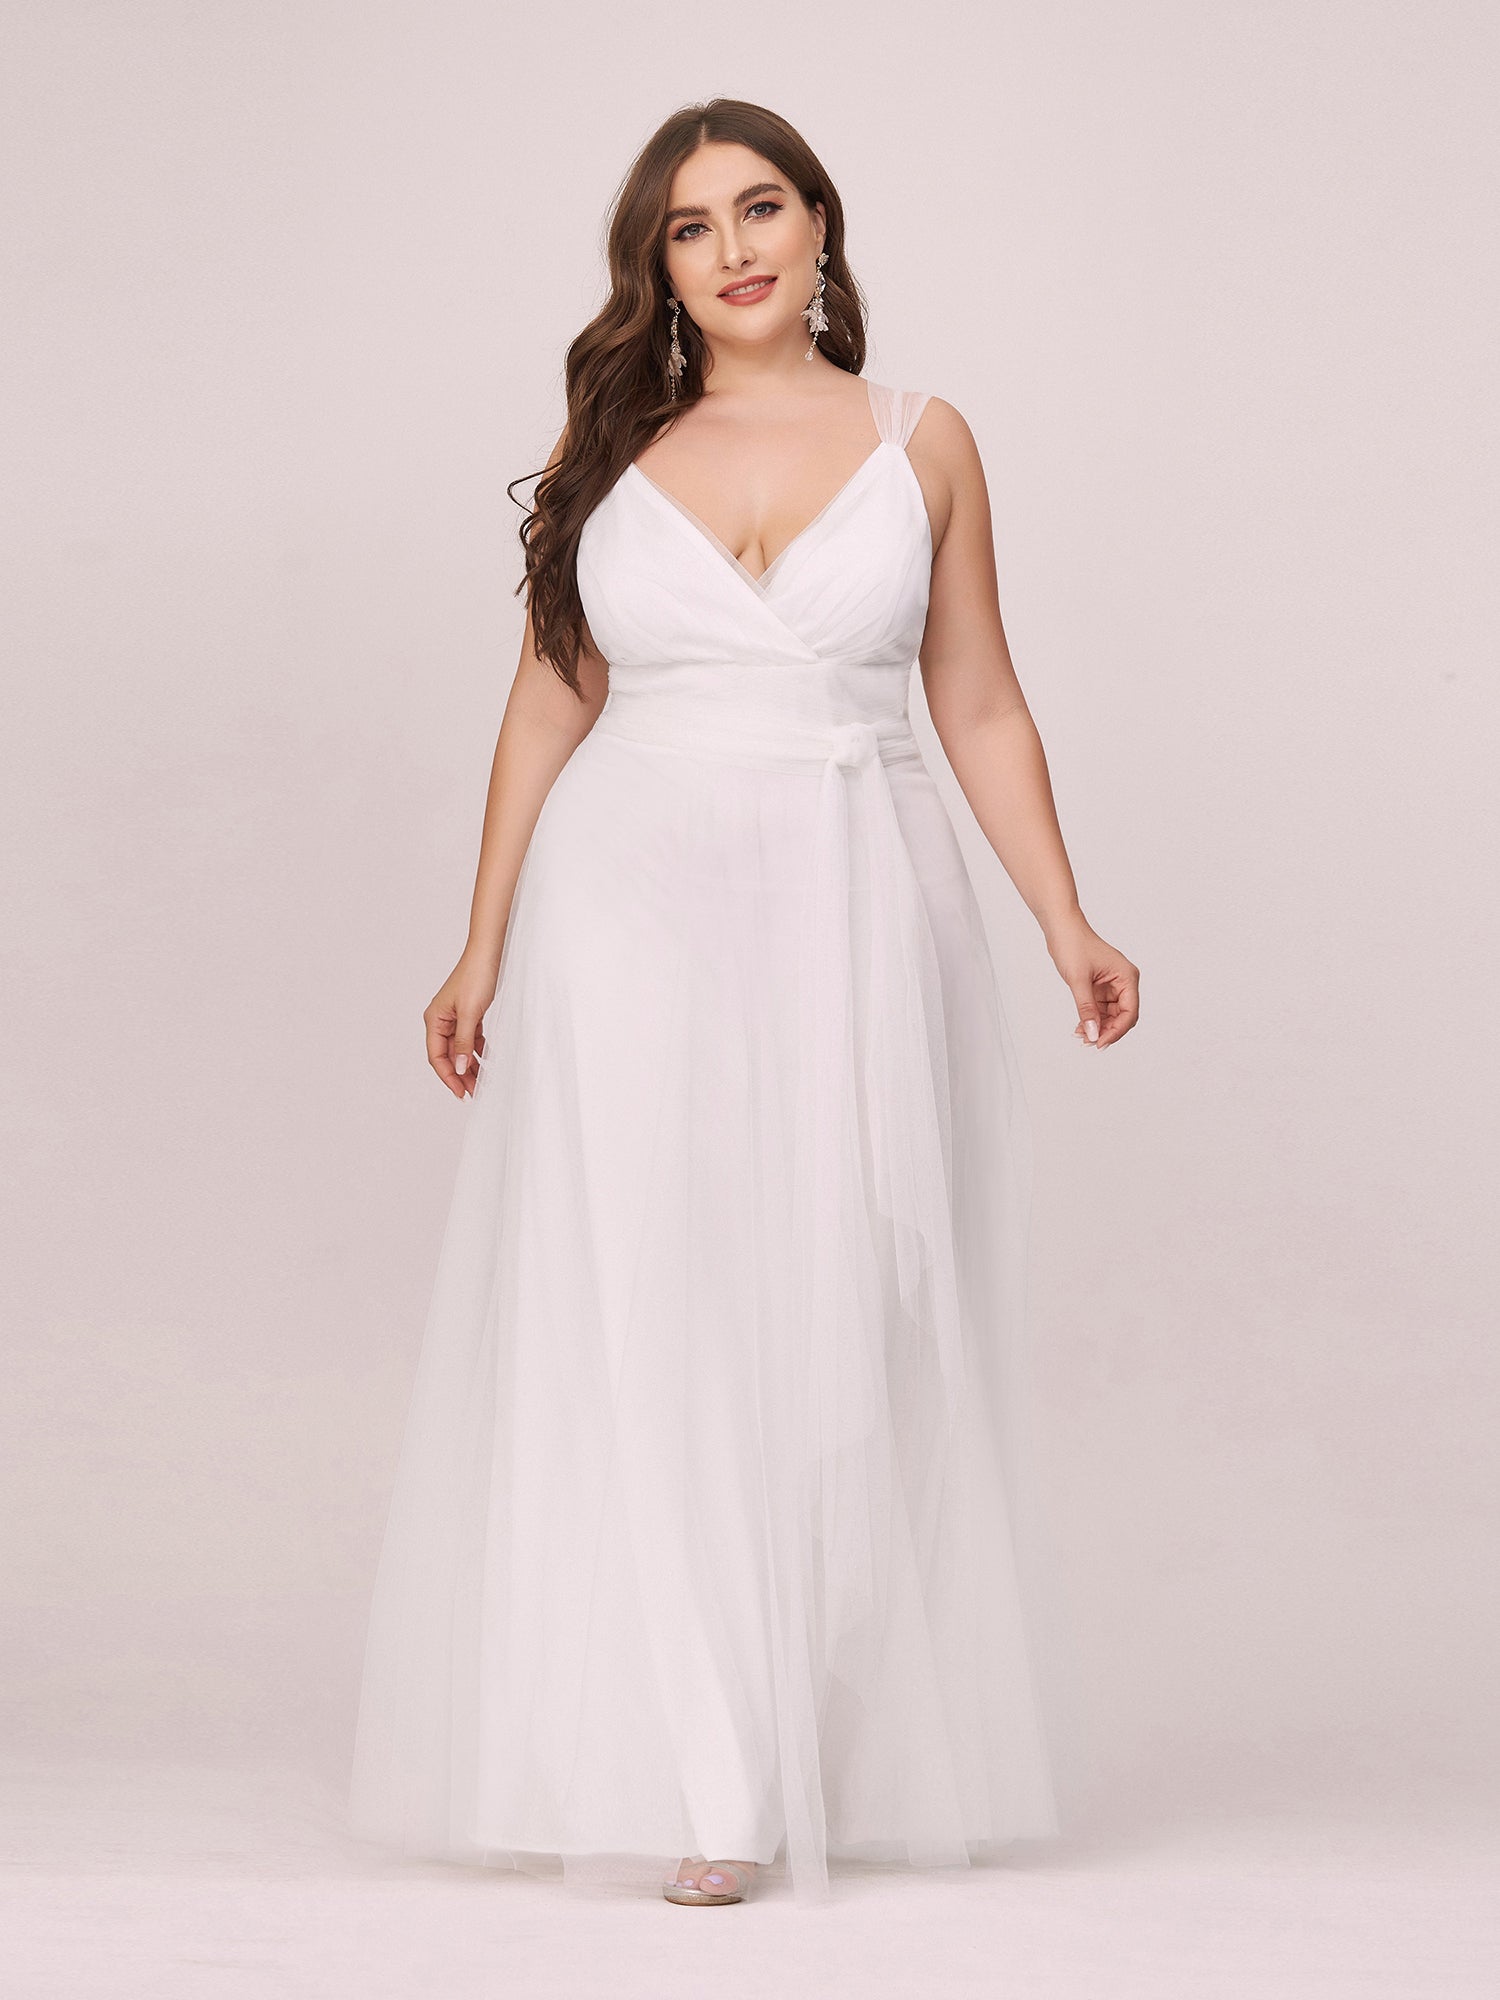 What Style Wedding Dress Looks Best on Plus Size on Ever Pretty?